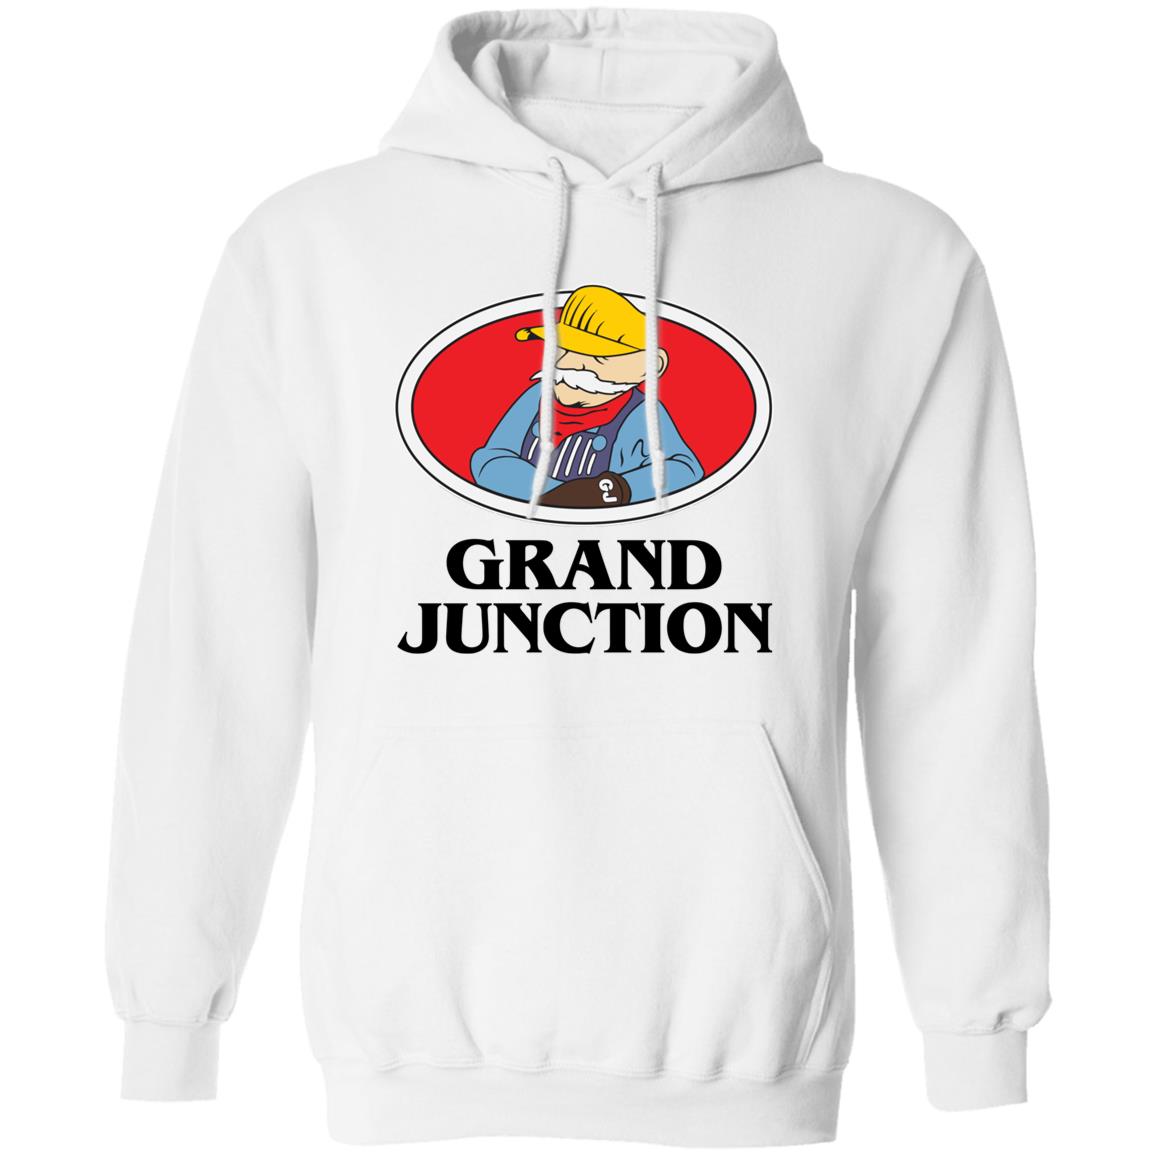 Grand Junction Grilled Subs Shirt Panetory – Graphic Design Apparel &Amp; Accessories Online